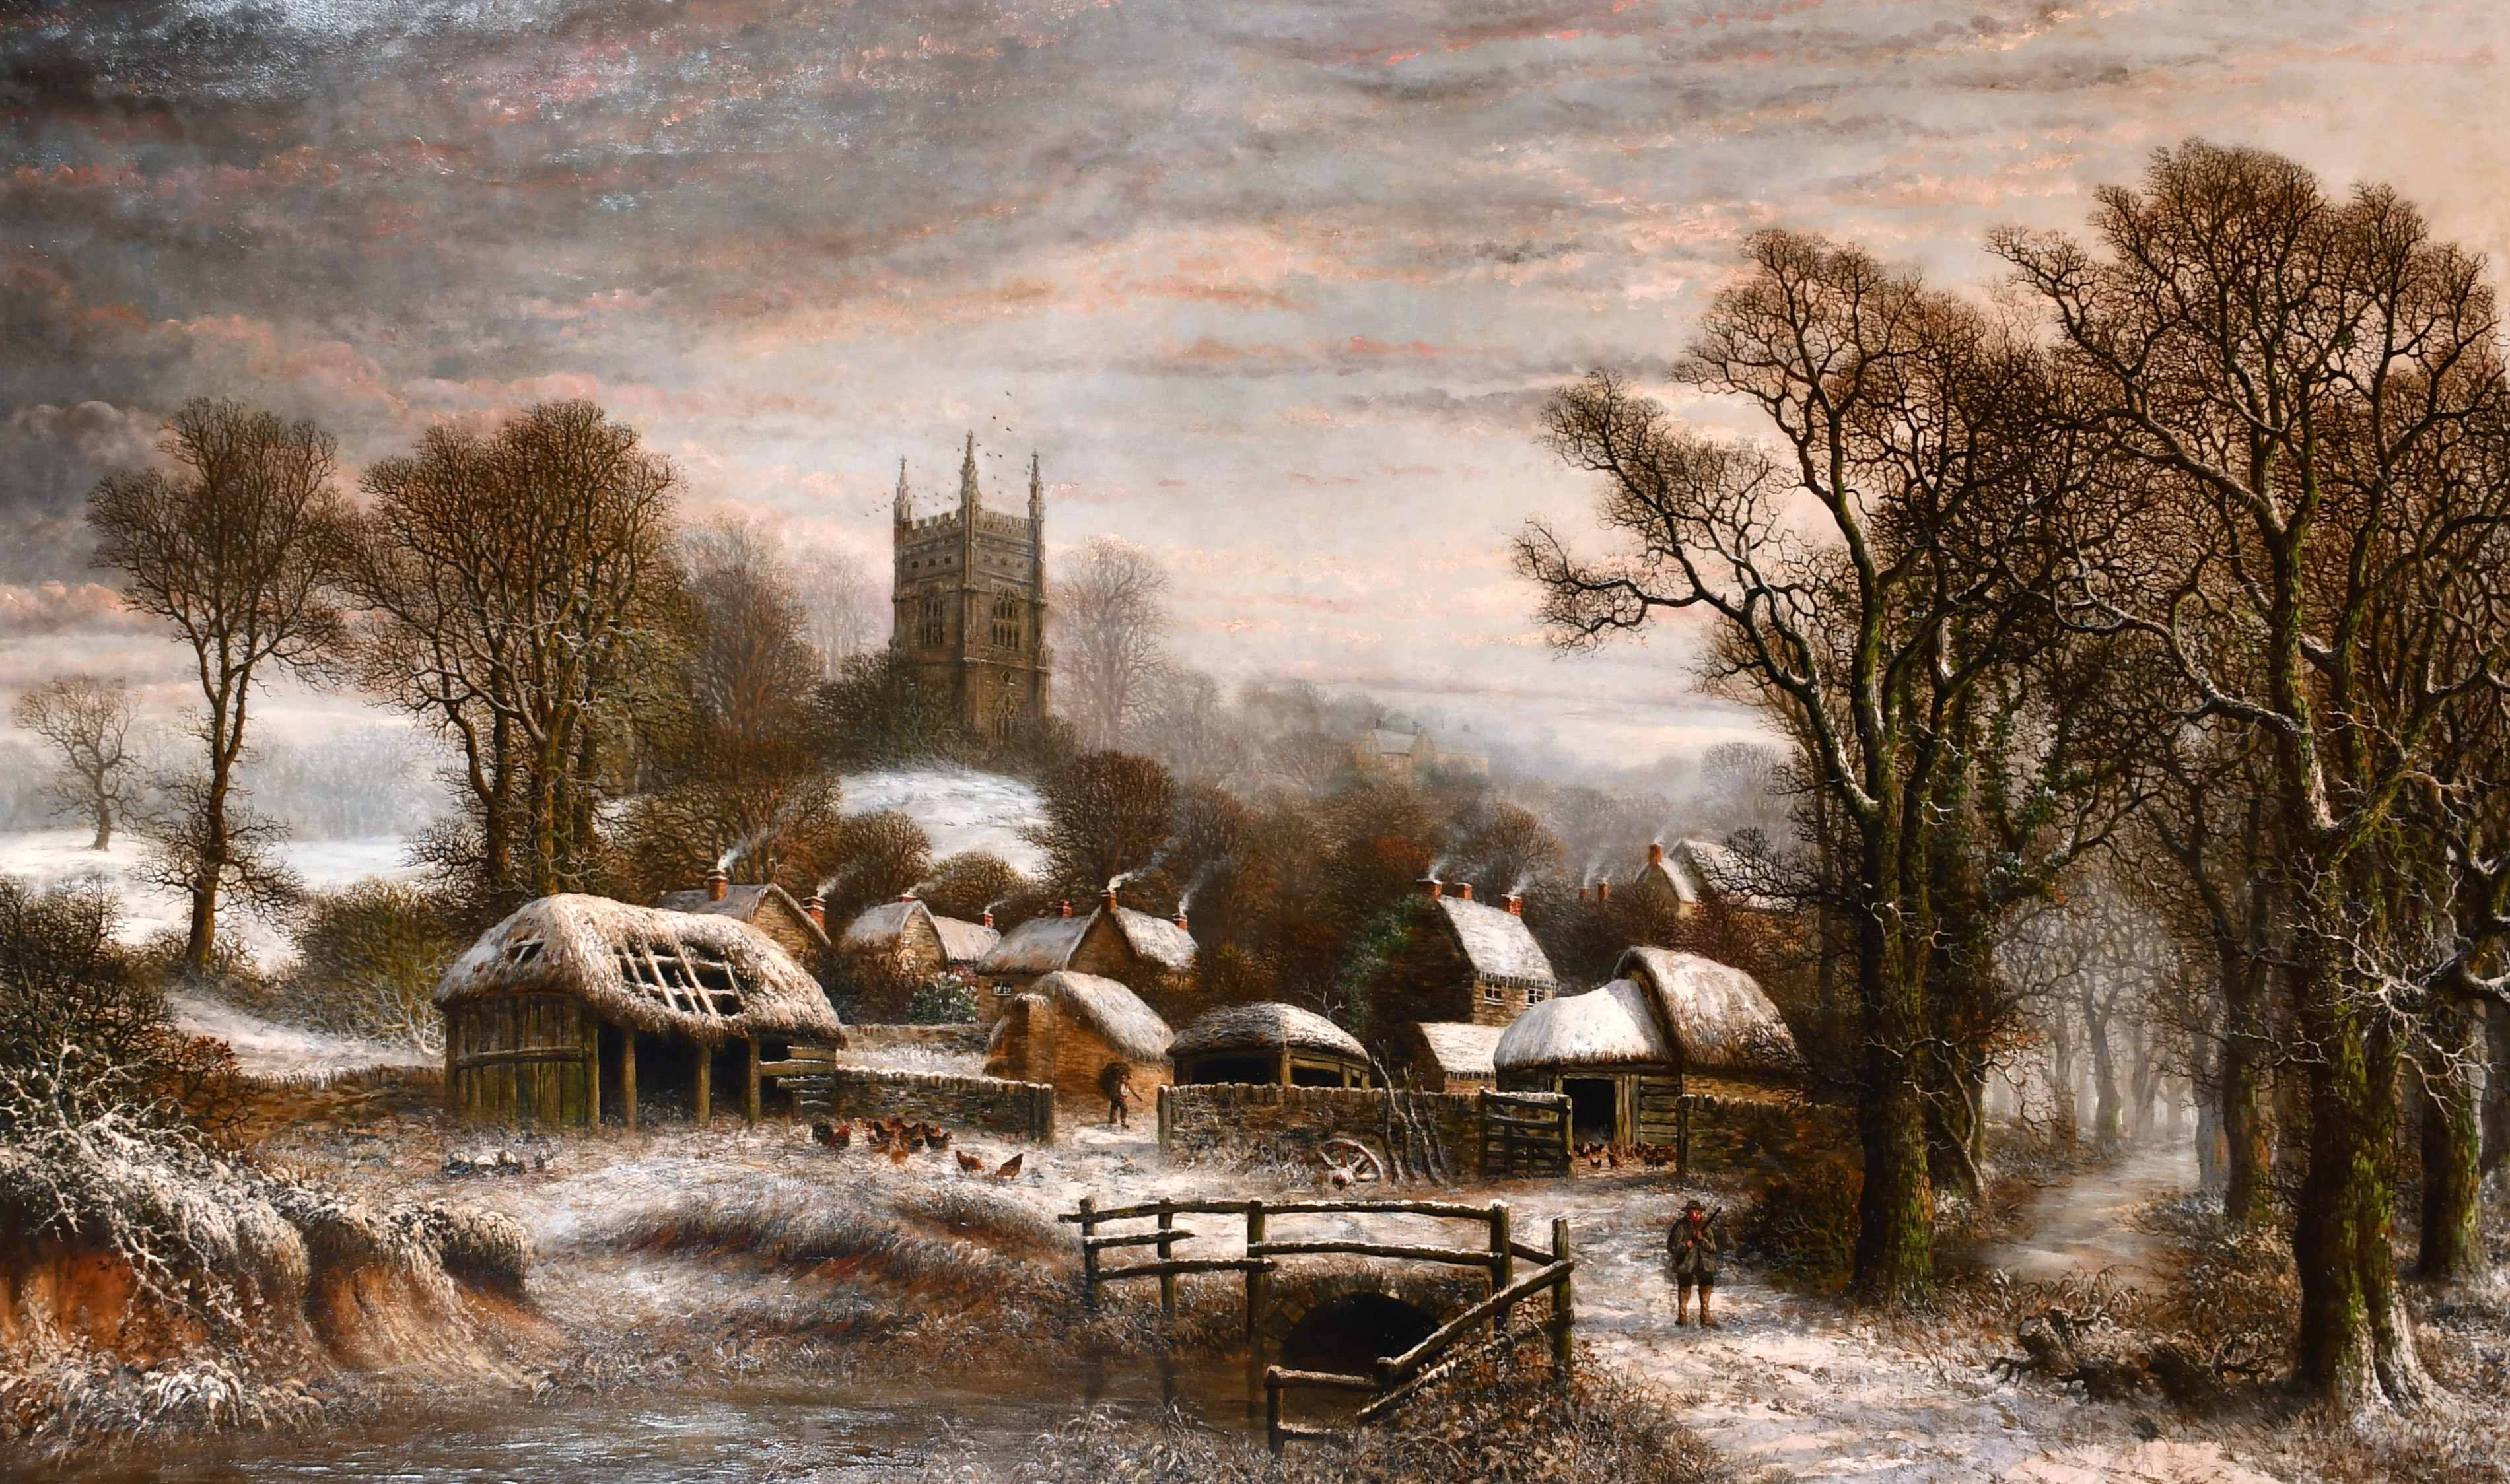 Charles Leaver (1824-1888) British. “Whiston, Northamptonshire”, A Winter Scene with Figures and